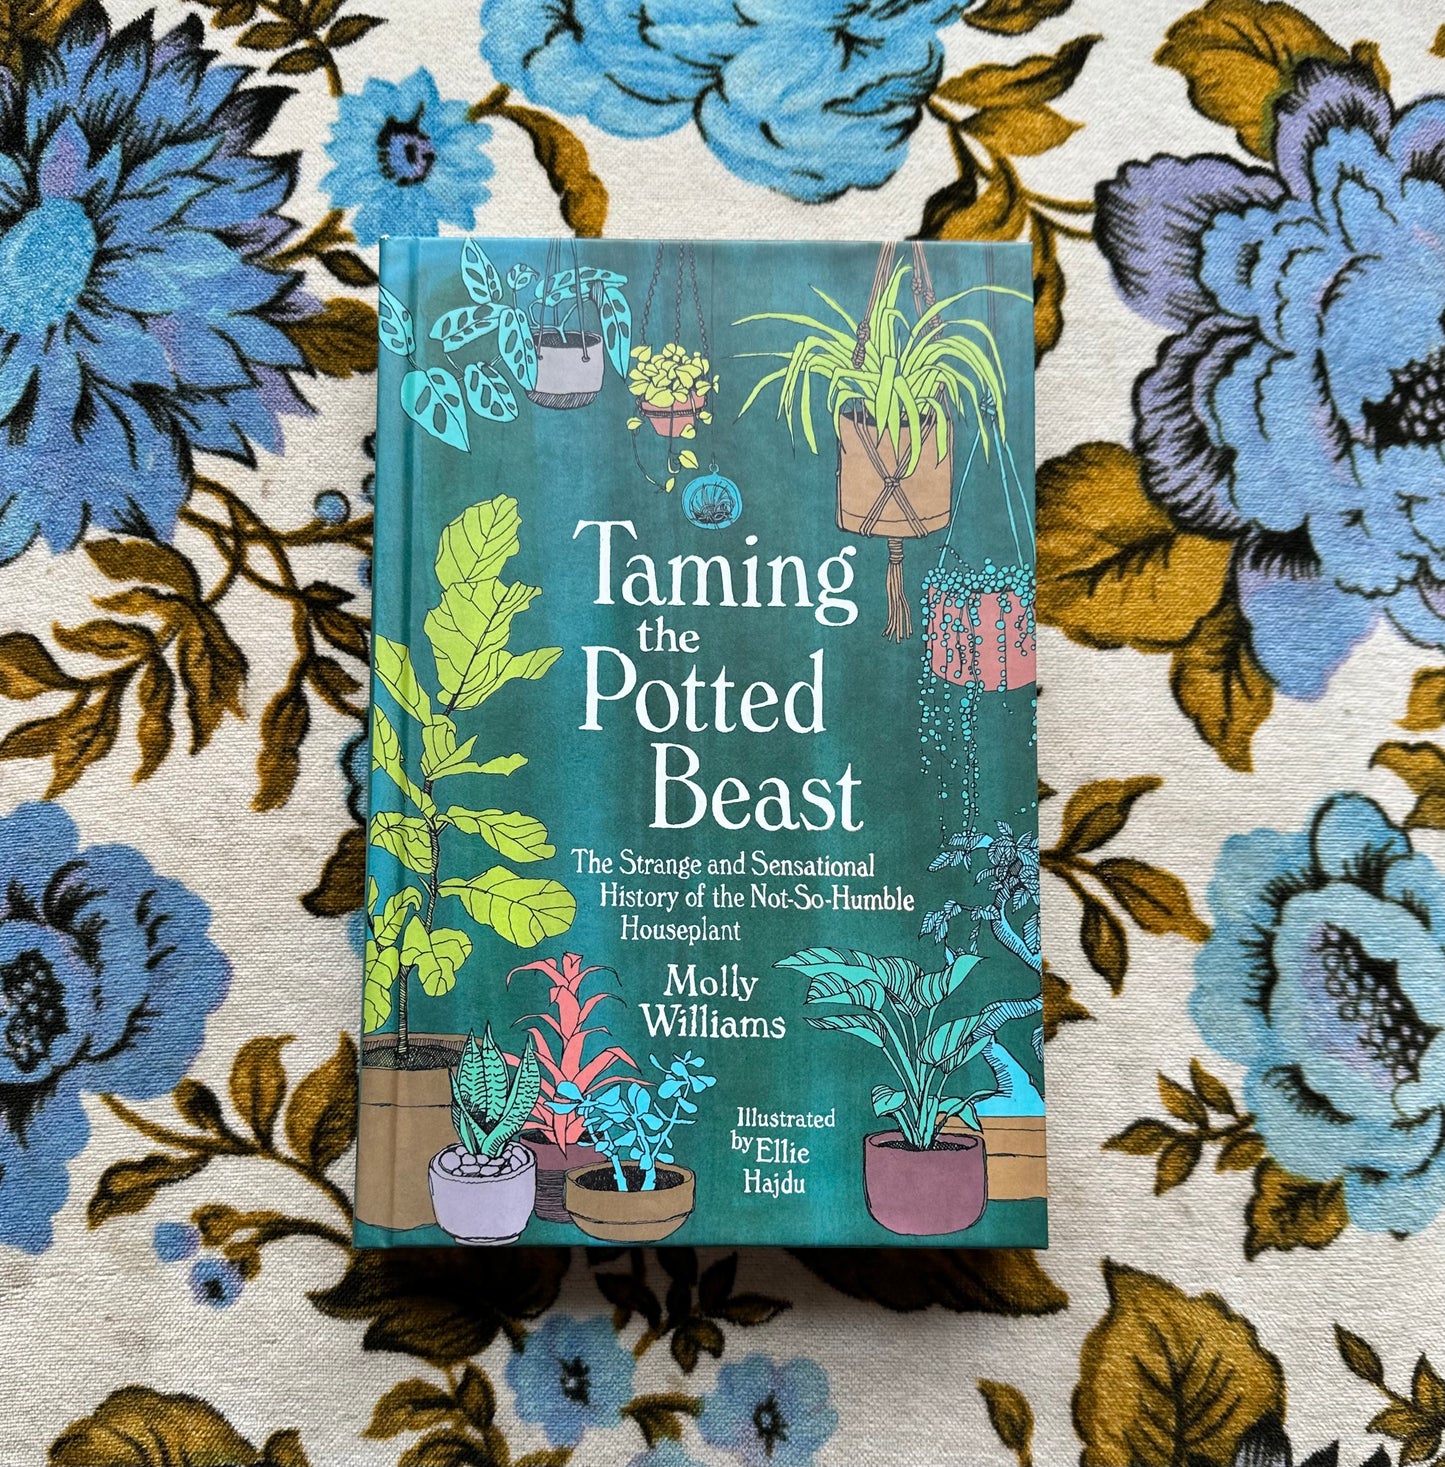 taming the potted beast: the strange and sensational history of the not-so-humble houseplant book from flower + furbish Shop now at flower + furbish